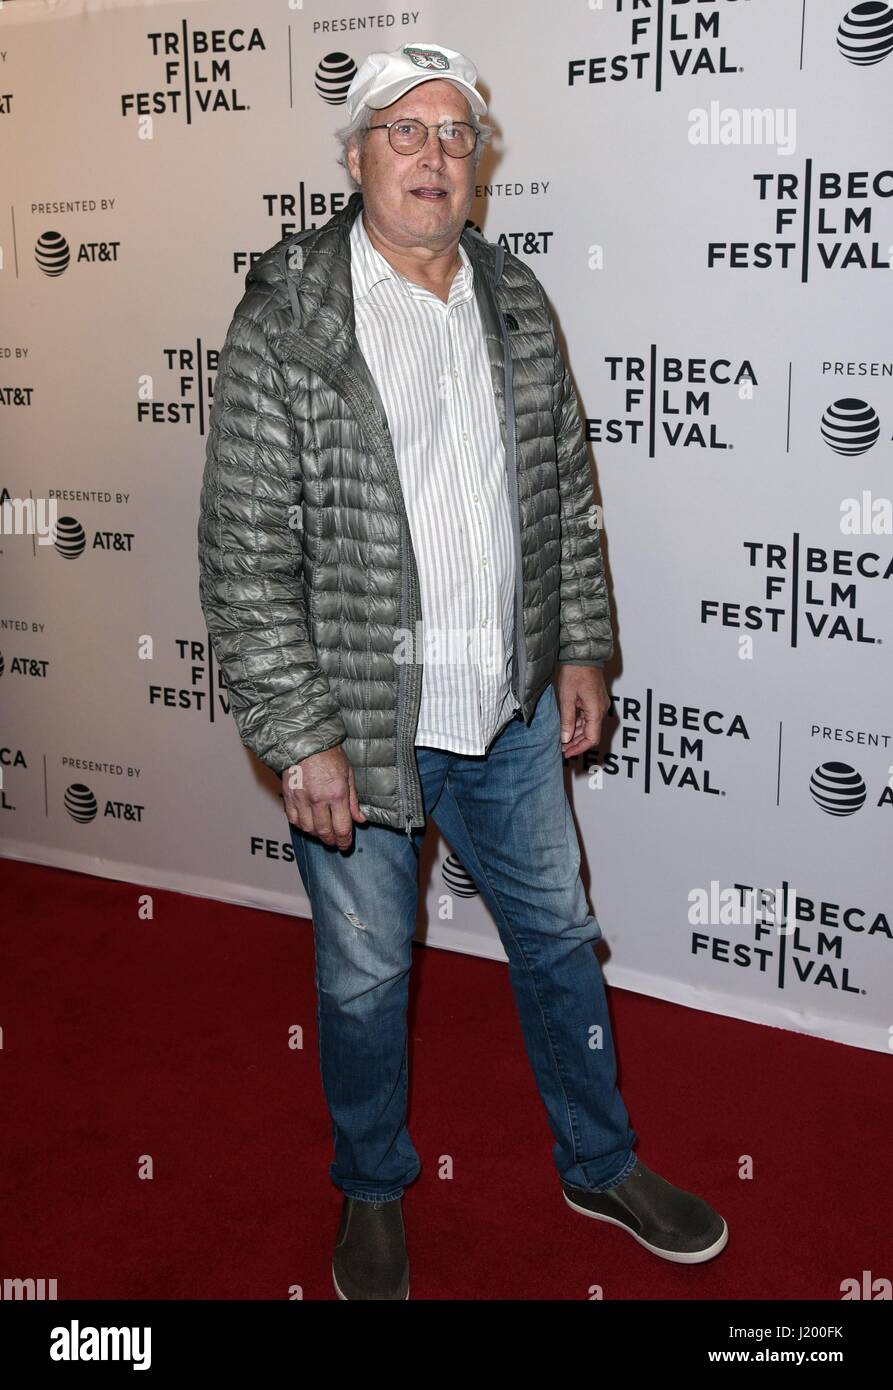 New York, NY, USA. 22nd Apr, 2017. Chevy Chase at arrivals for DOG YEARS Premiere at the 2017 Tribeca Film Festival, Cinepolis Chelsea, New York, NY April 22, 2017. Credit: Derek Storm/Everett Collection/Alamy Live News Stock Photo